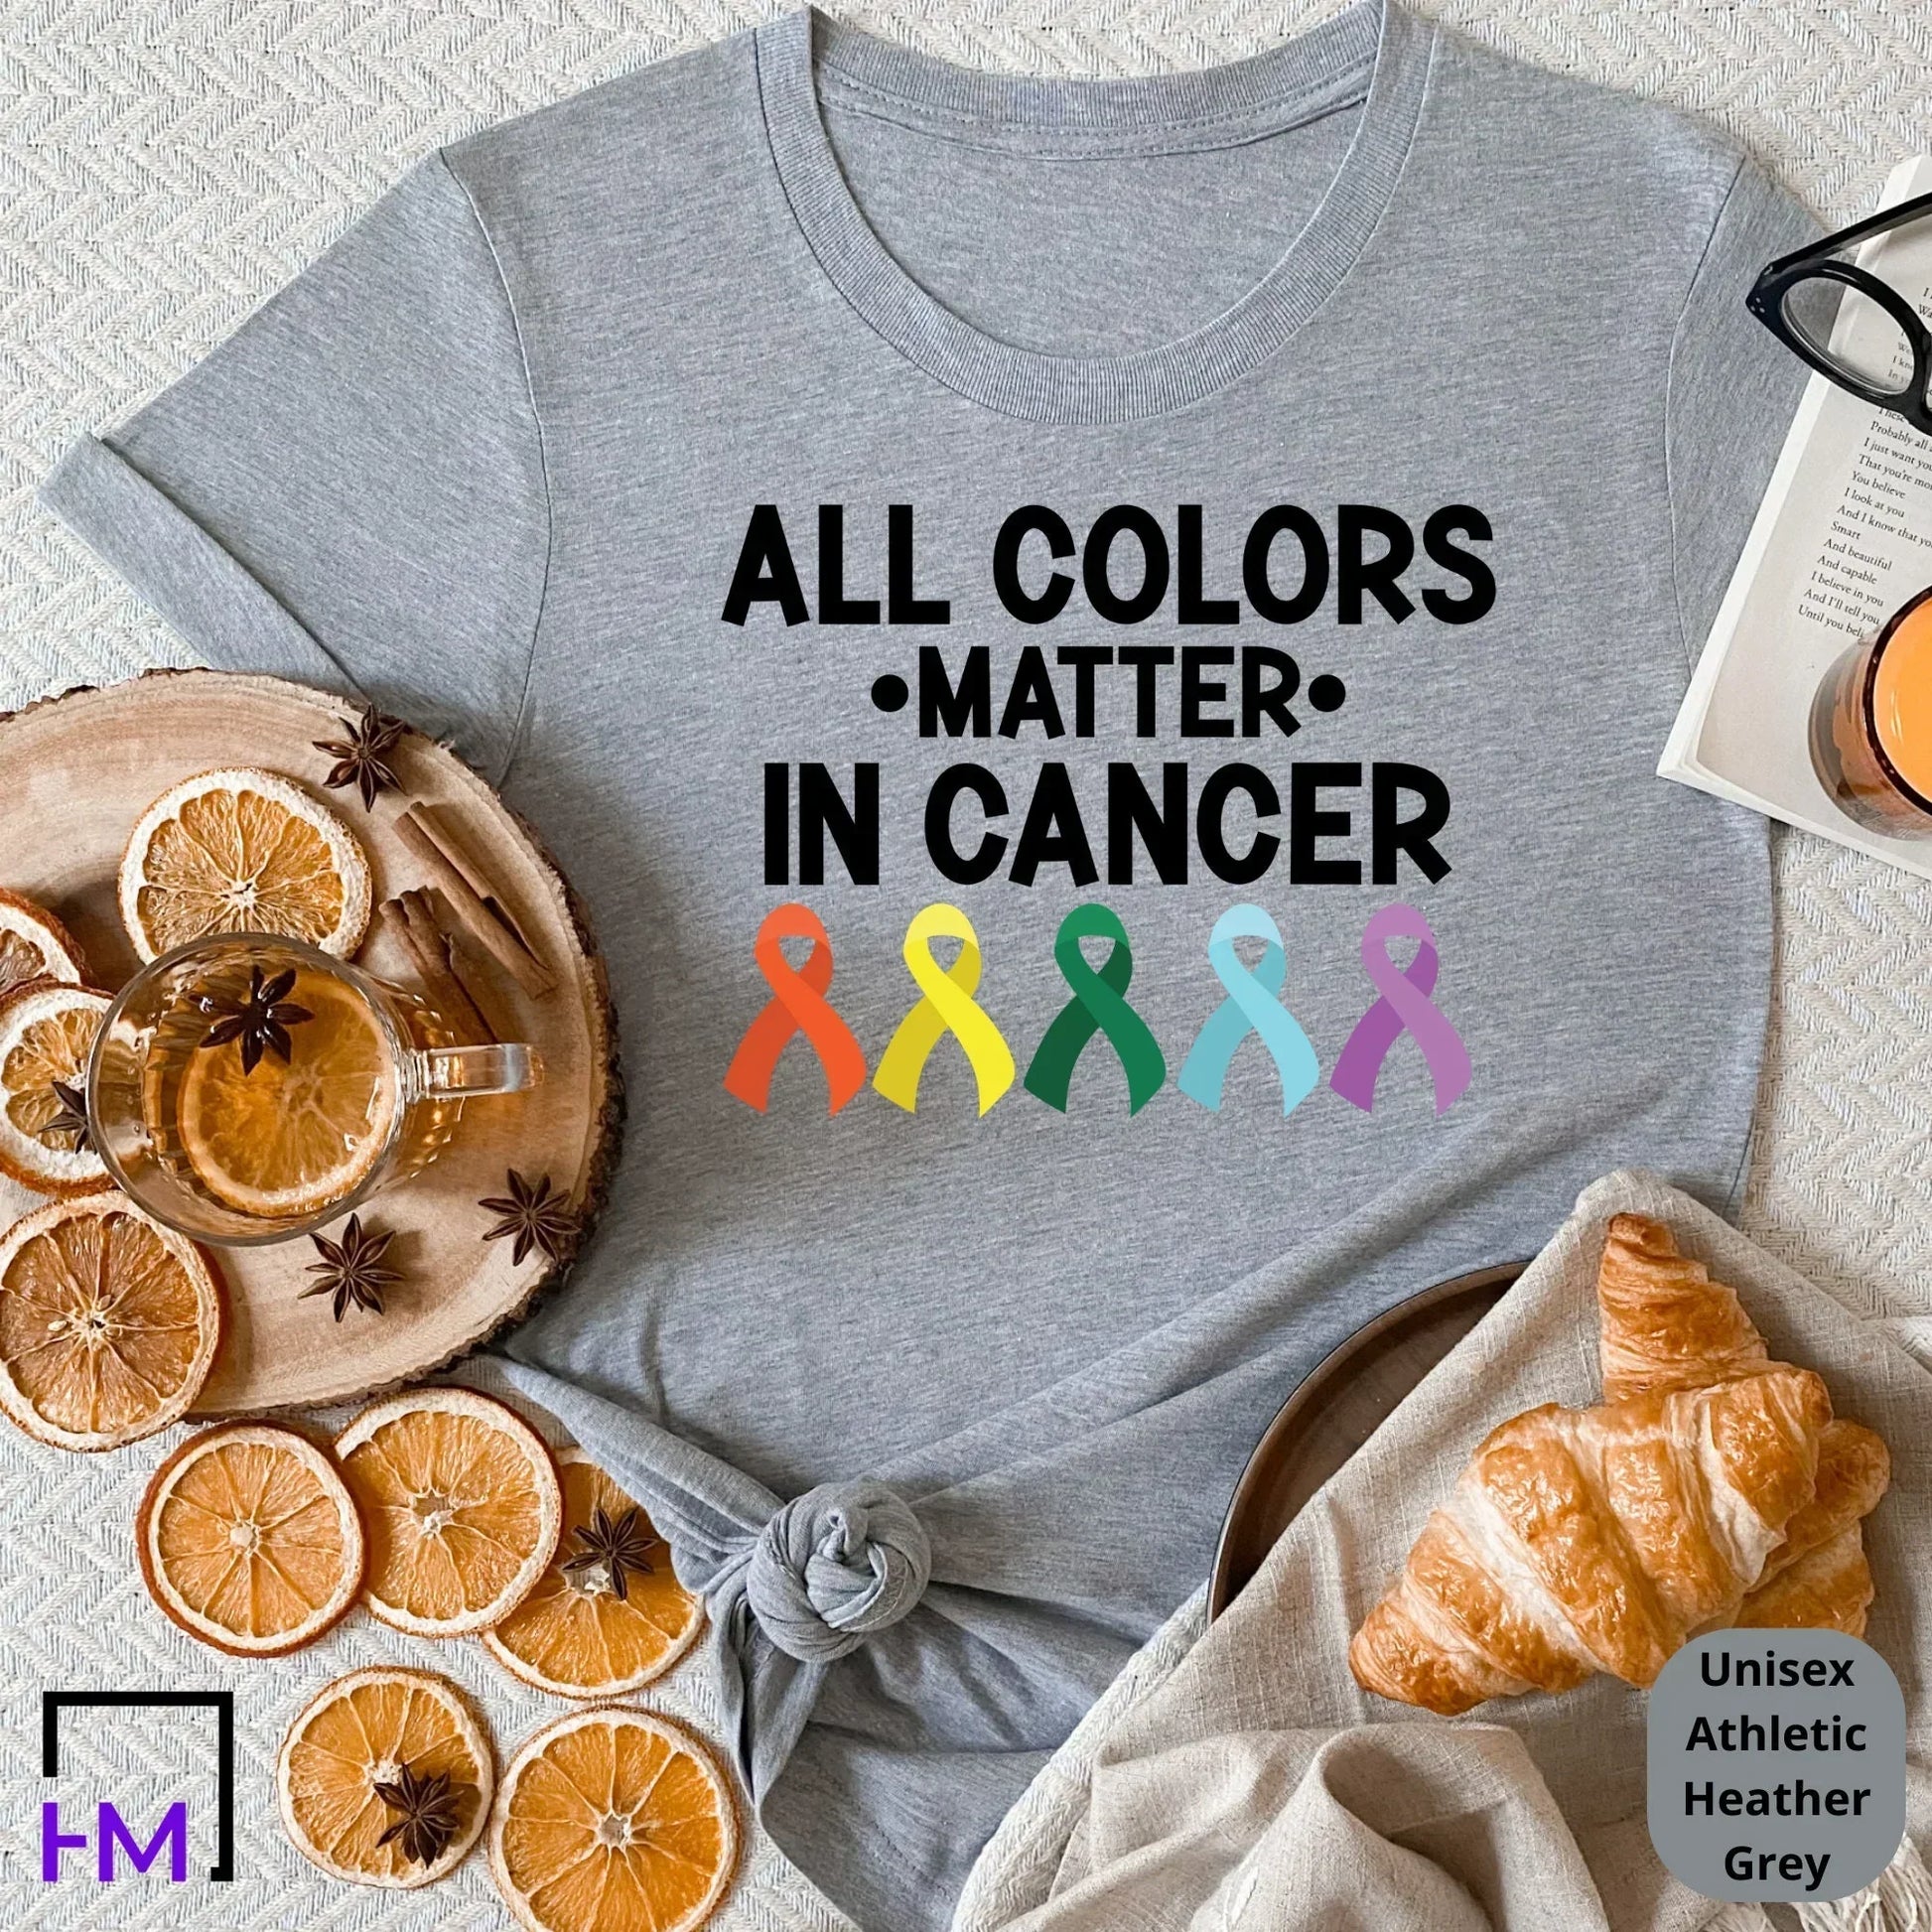 Fight Cancer in Every Color T-shirt, Colorful Cancer Awareness Gift, Cancer Ribbon Tee, Rainbow Ribbon Sweater, Cancer Support Sweatshirt